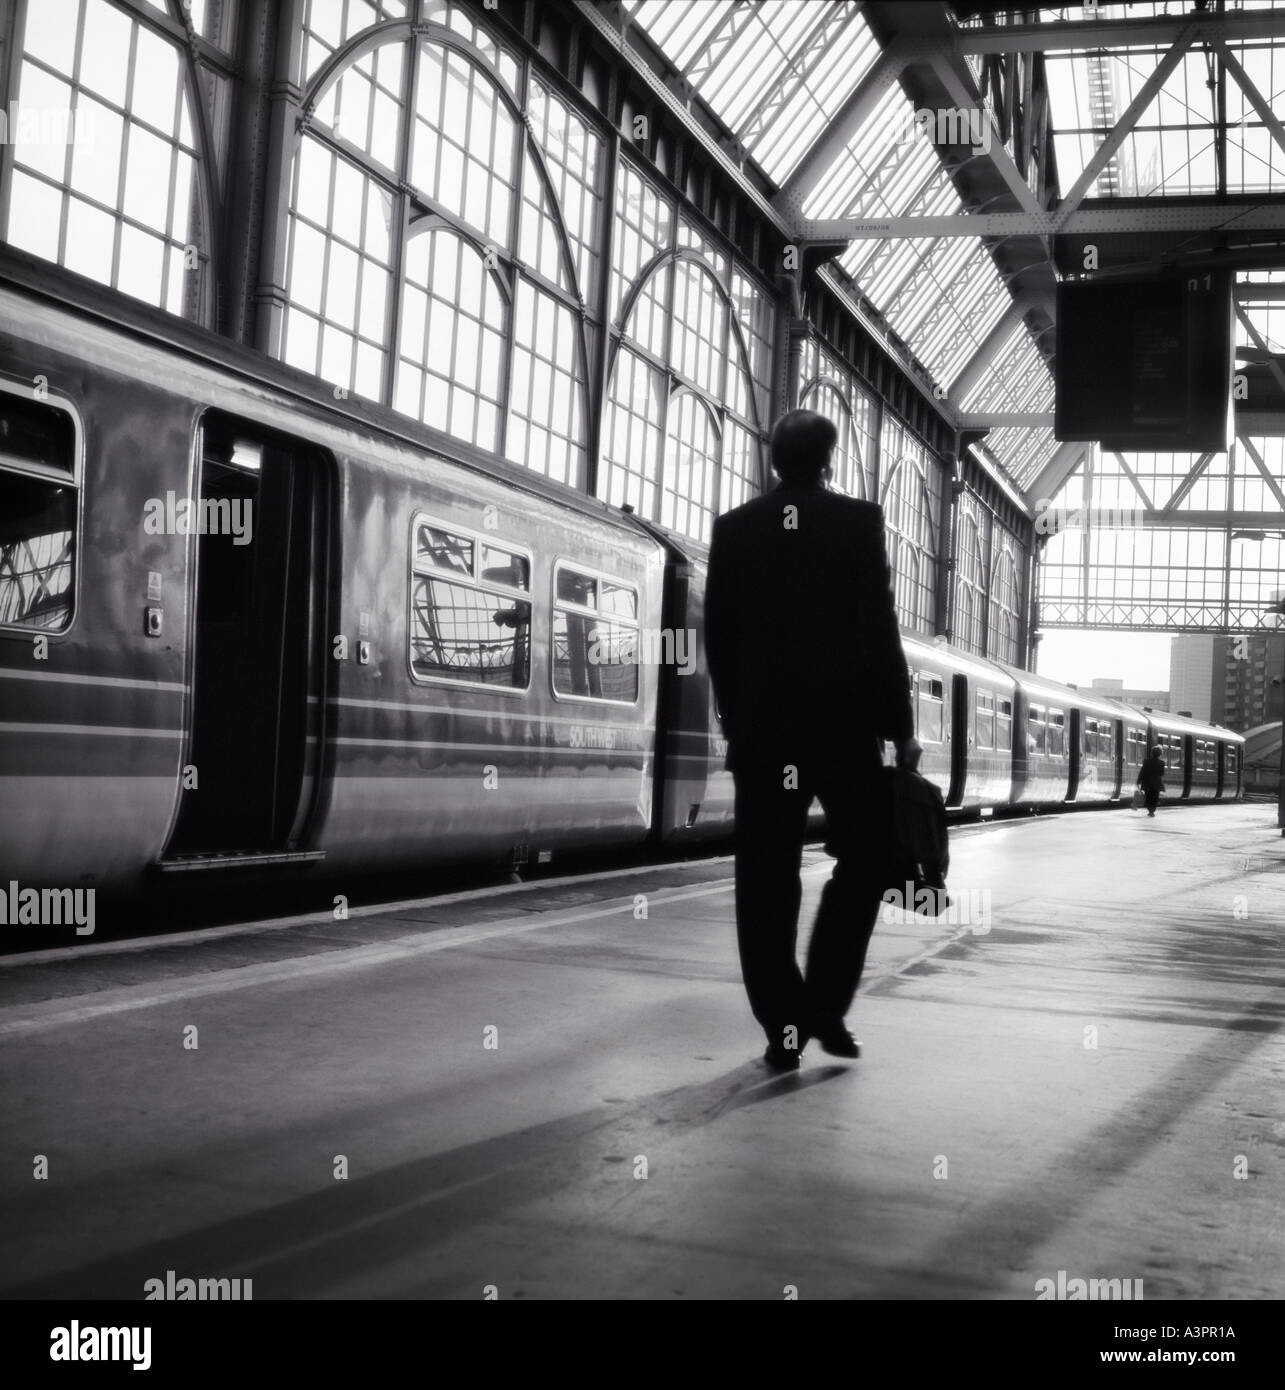 Commuter boarding a train at Waterloo station London England Stock Photo